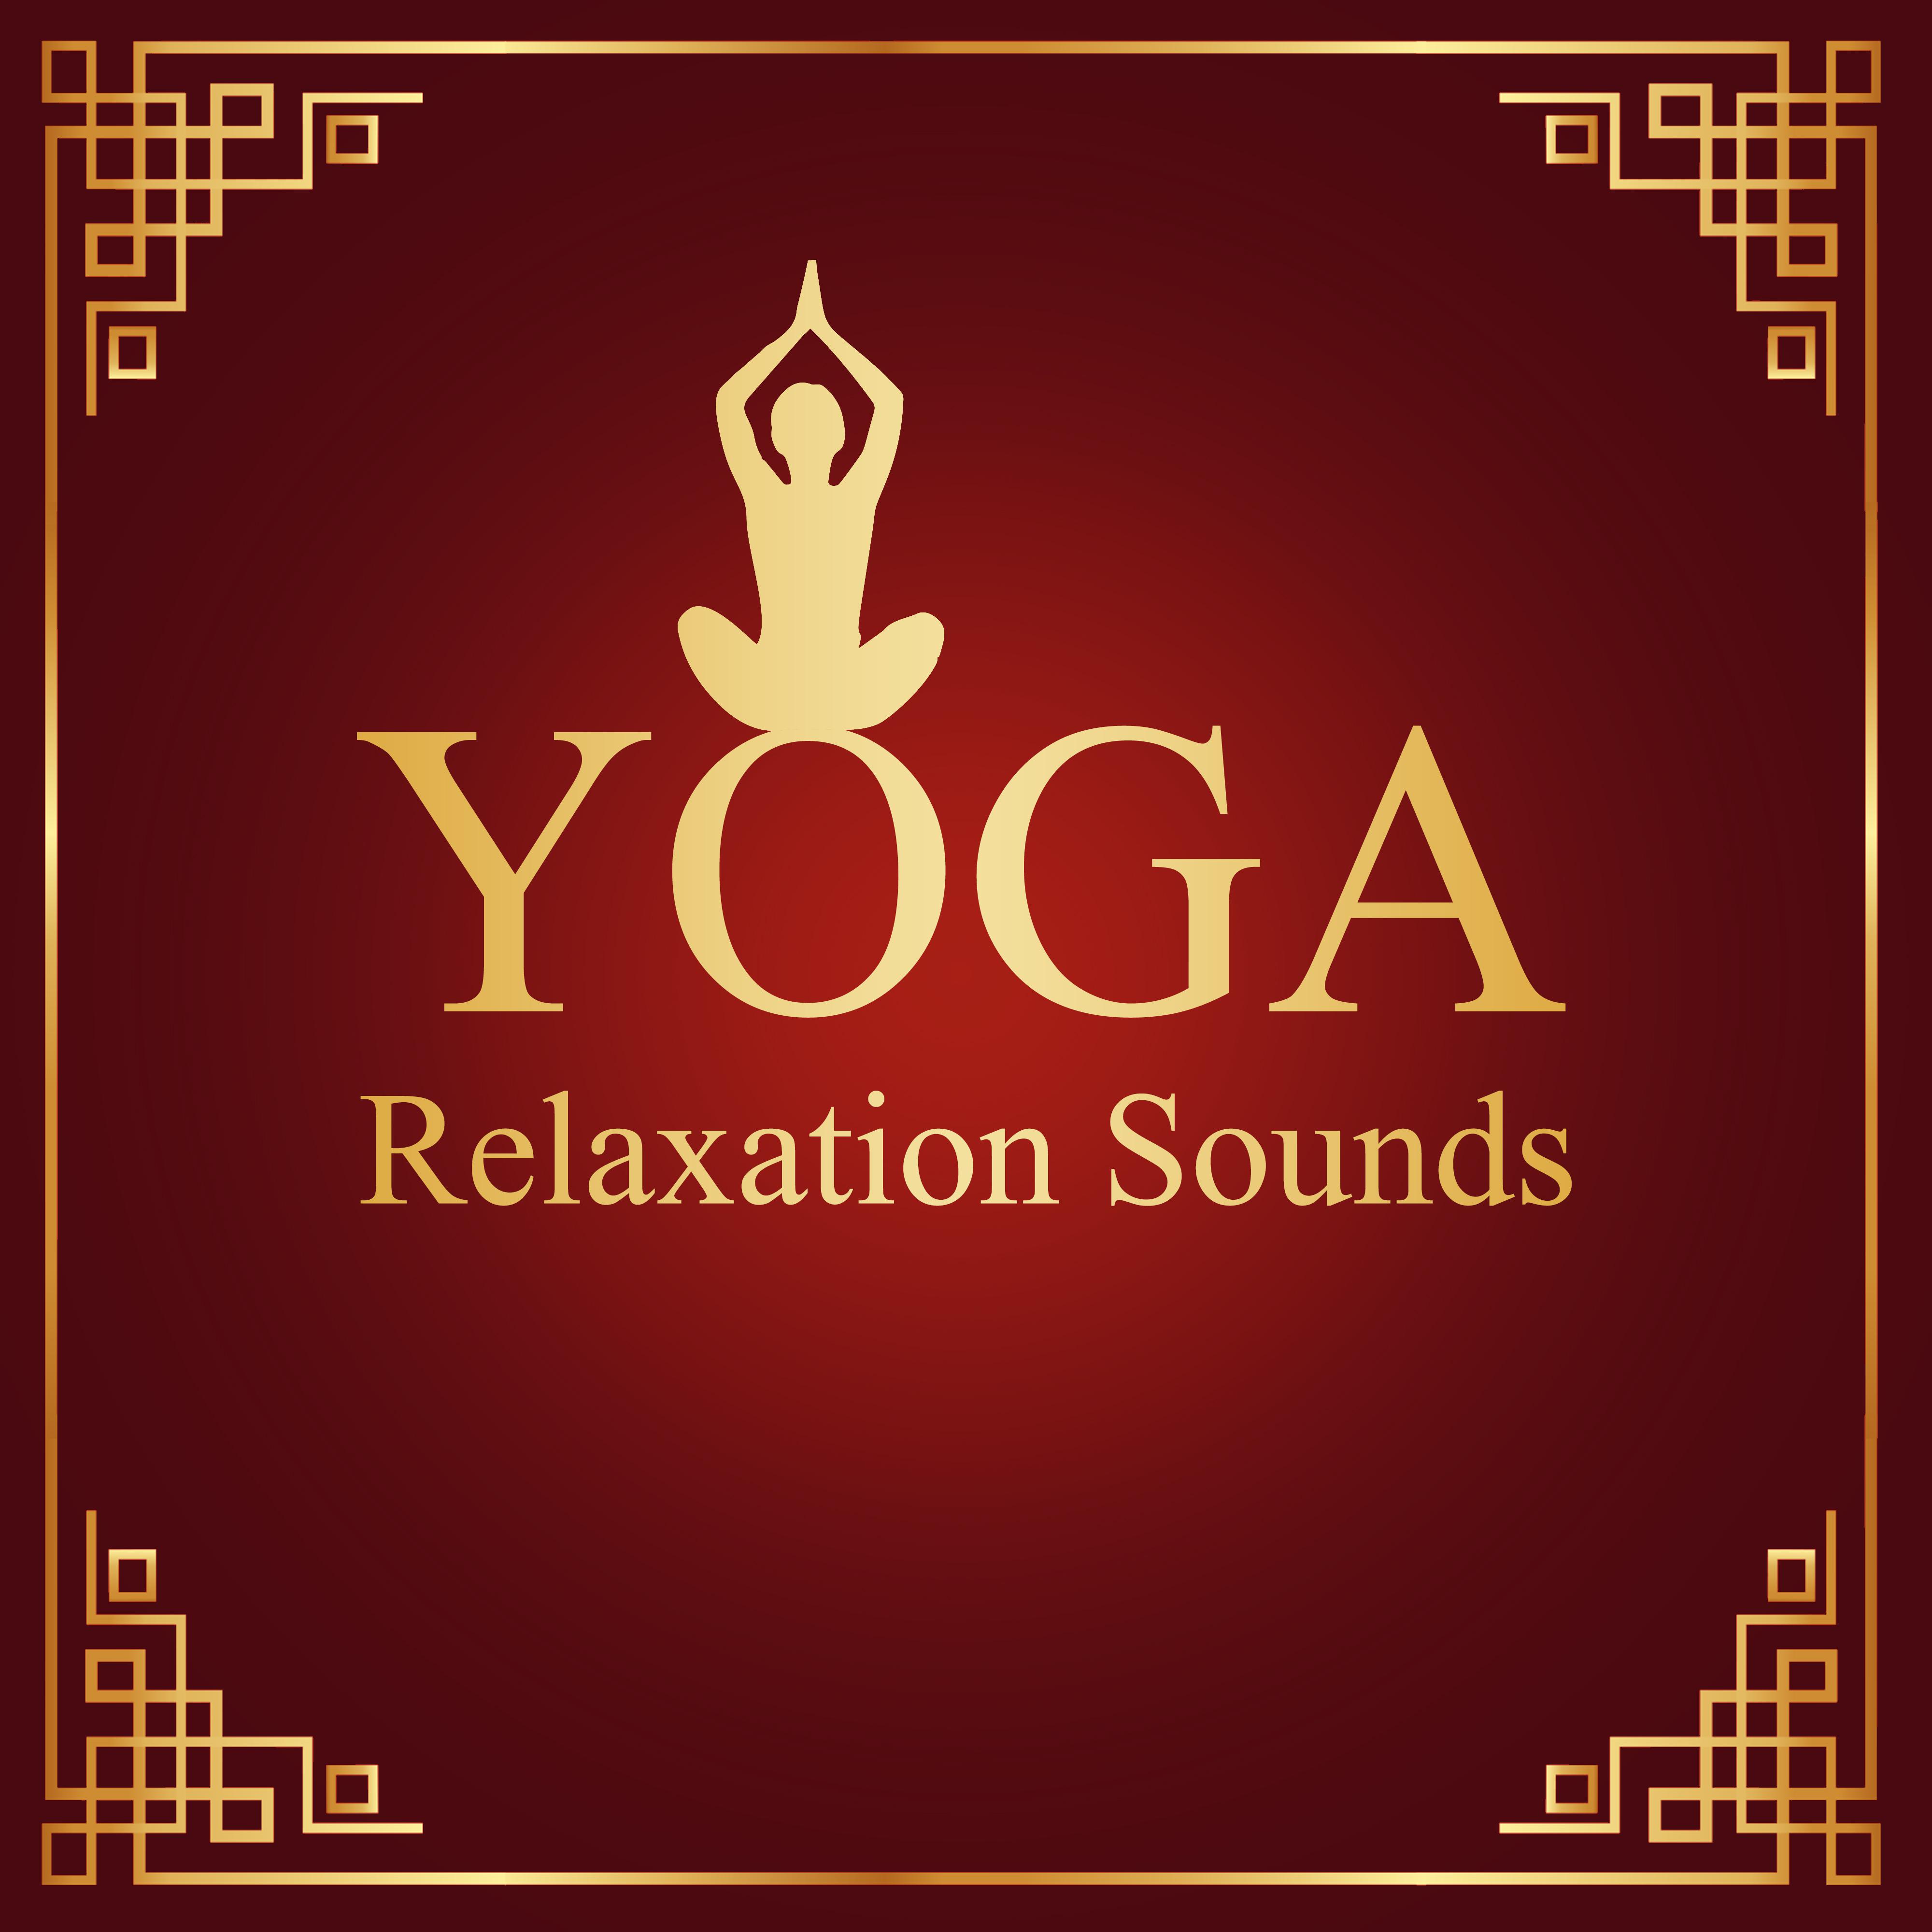 Yoga Relaxation Sounds – Meditation Music to Calm Mind & Body, Training Time, Soft New Age Music, Stress Free